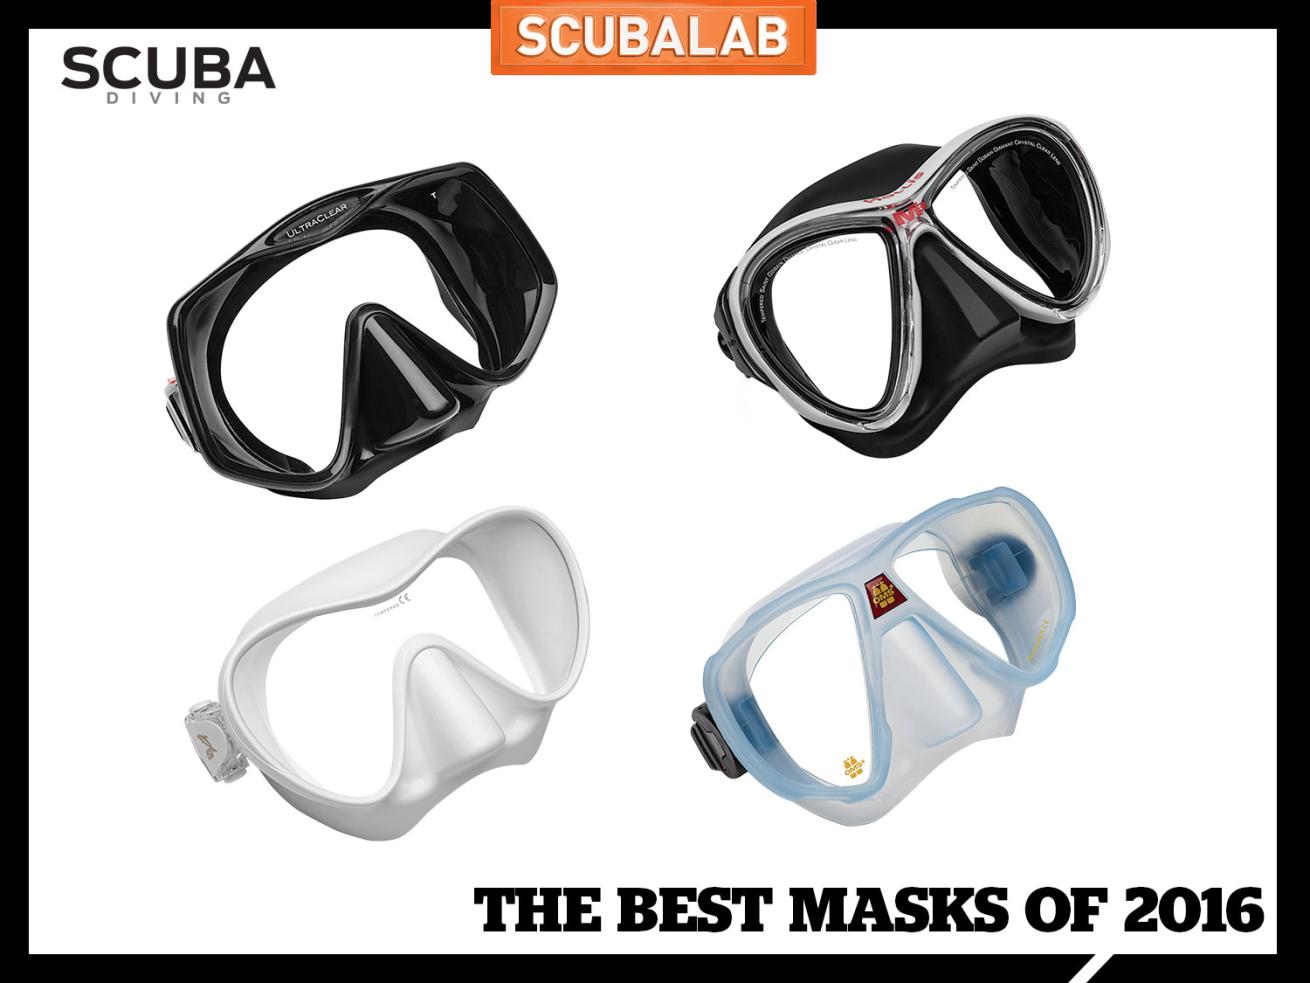 ScubaLab Tests the Best Dive Masks of 2016